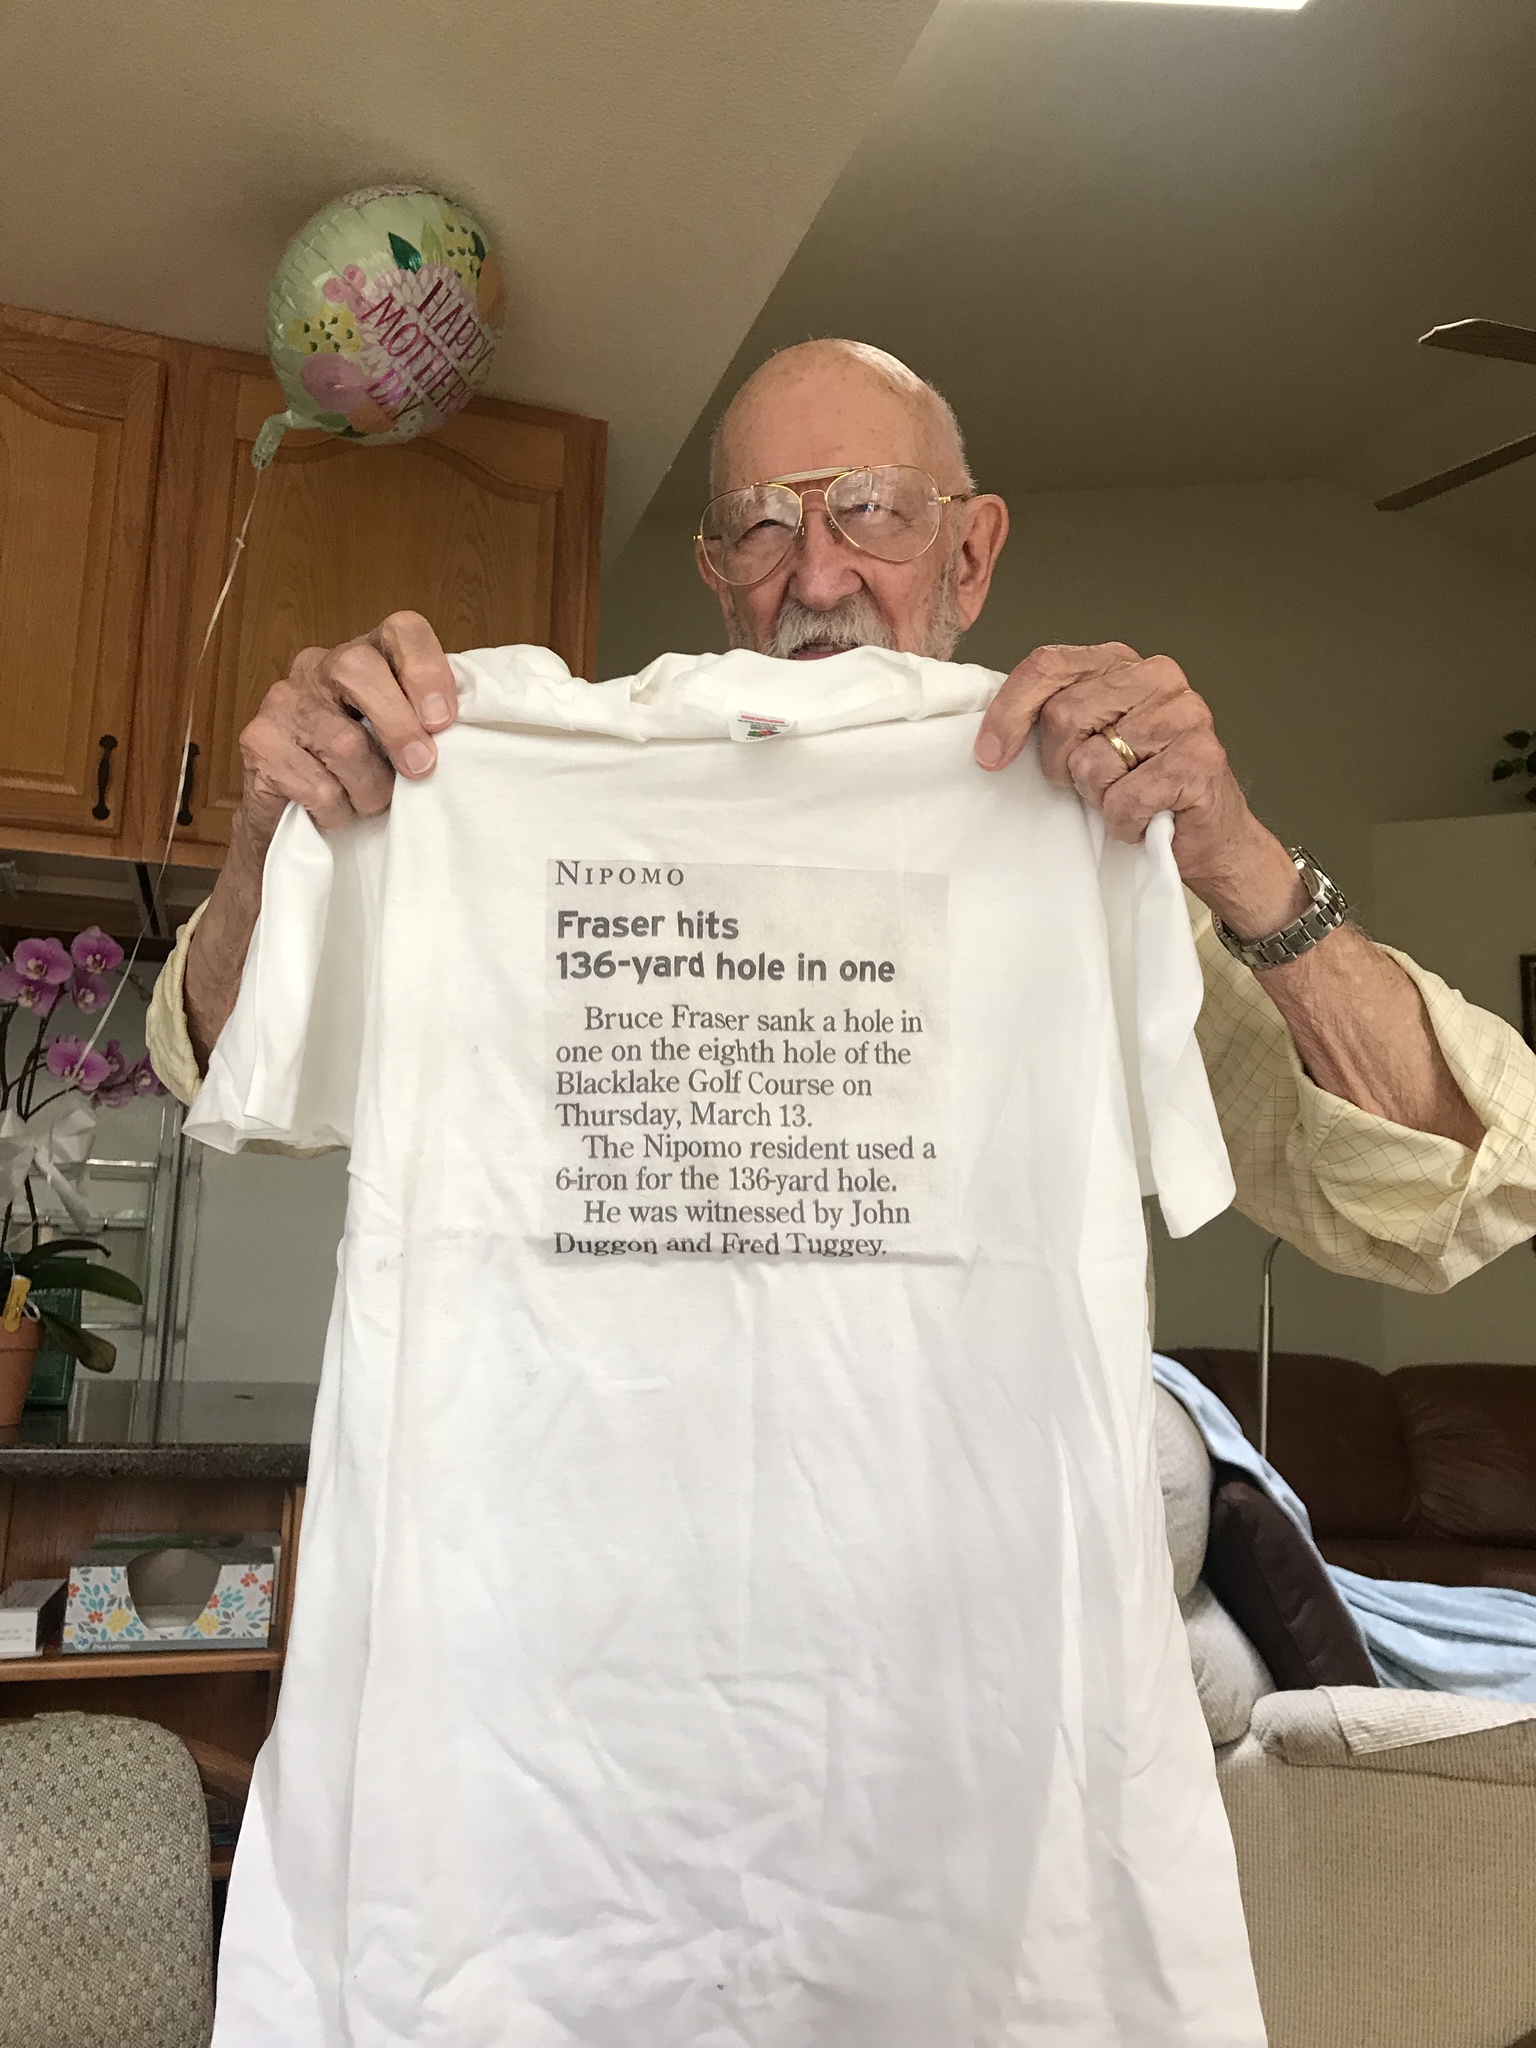 Man holding up a t-shirt with the article about him hitting a hole in 1 in a golf game